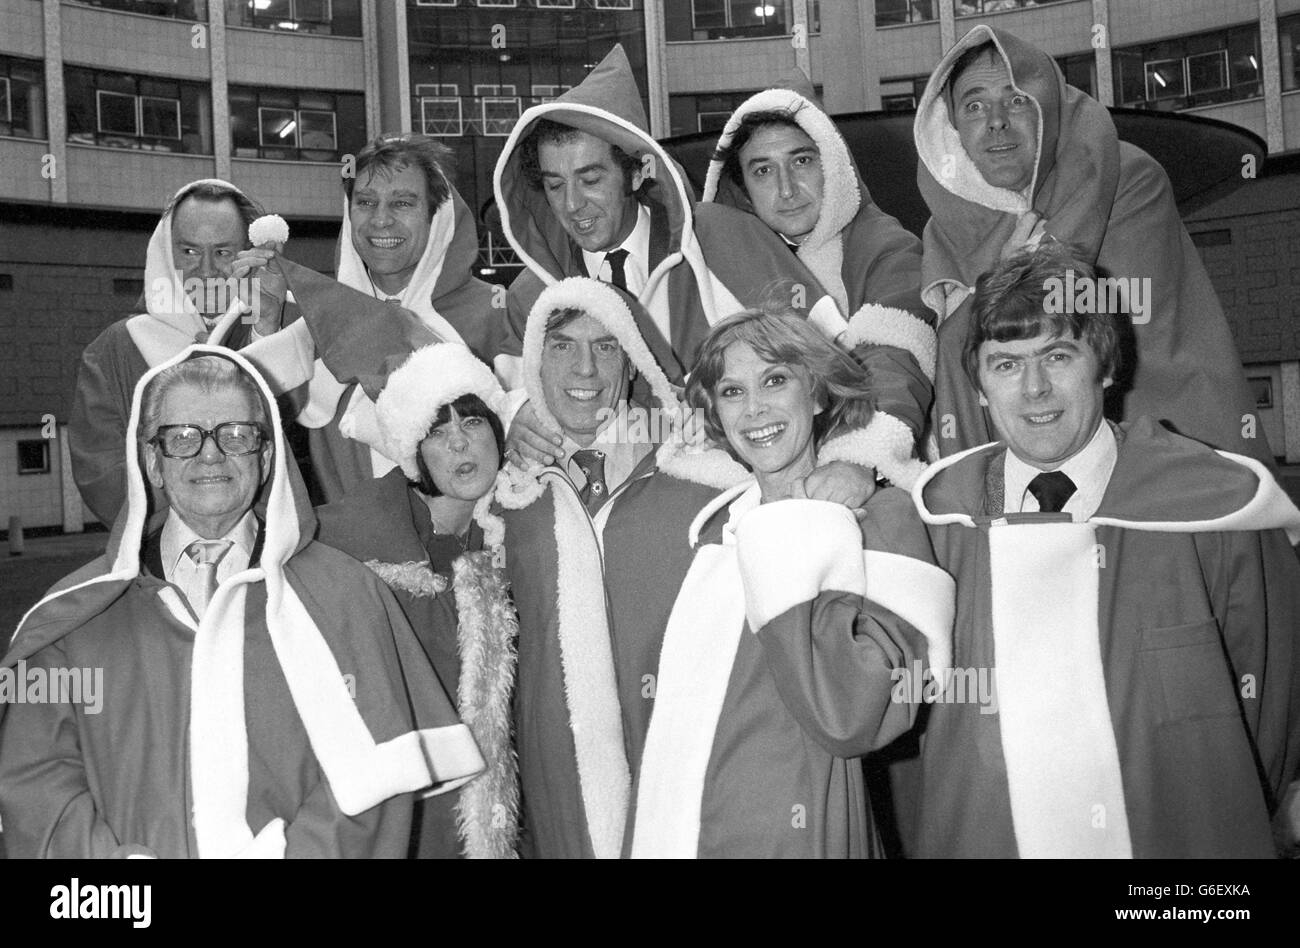 TV stars who will be appearing in BBC programmes over the Christmas season gather outside the BBC Television Centre in London. Back row (l-r): Peter Sallis, Jerry Stevens, Lenny Bennett, Bruce Montague and Terry Wogan. Front row (l-r): Bill Owen, Isla St Clair, Larry Grayson, Wendy Craig and Mike Yarwood. Stock Photo